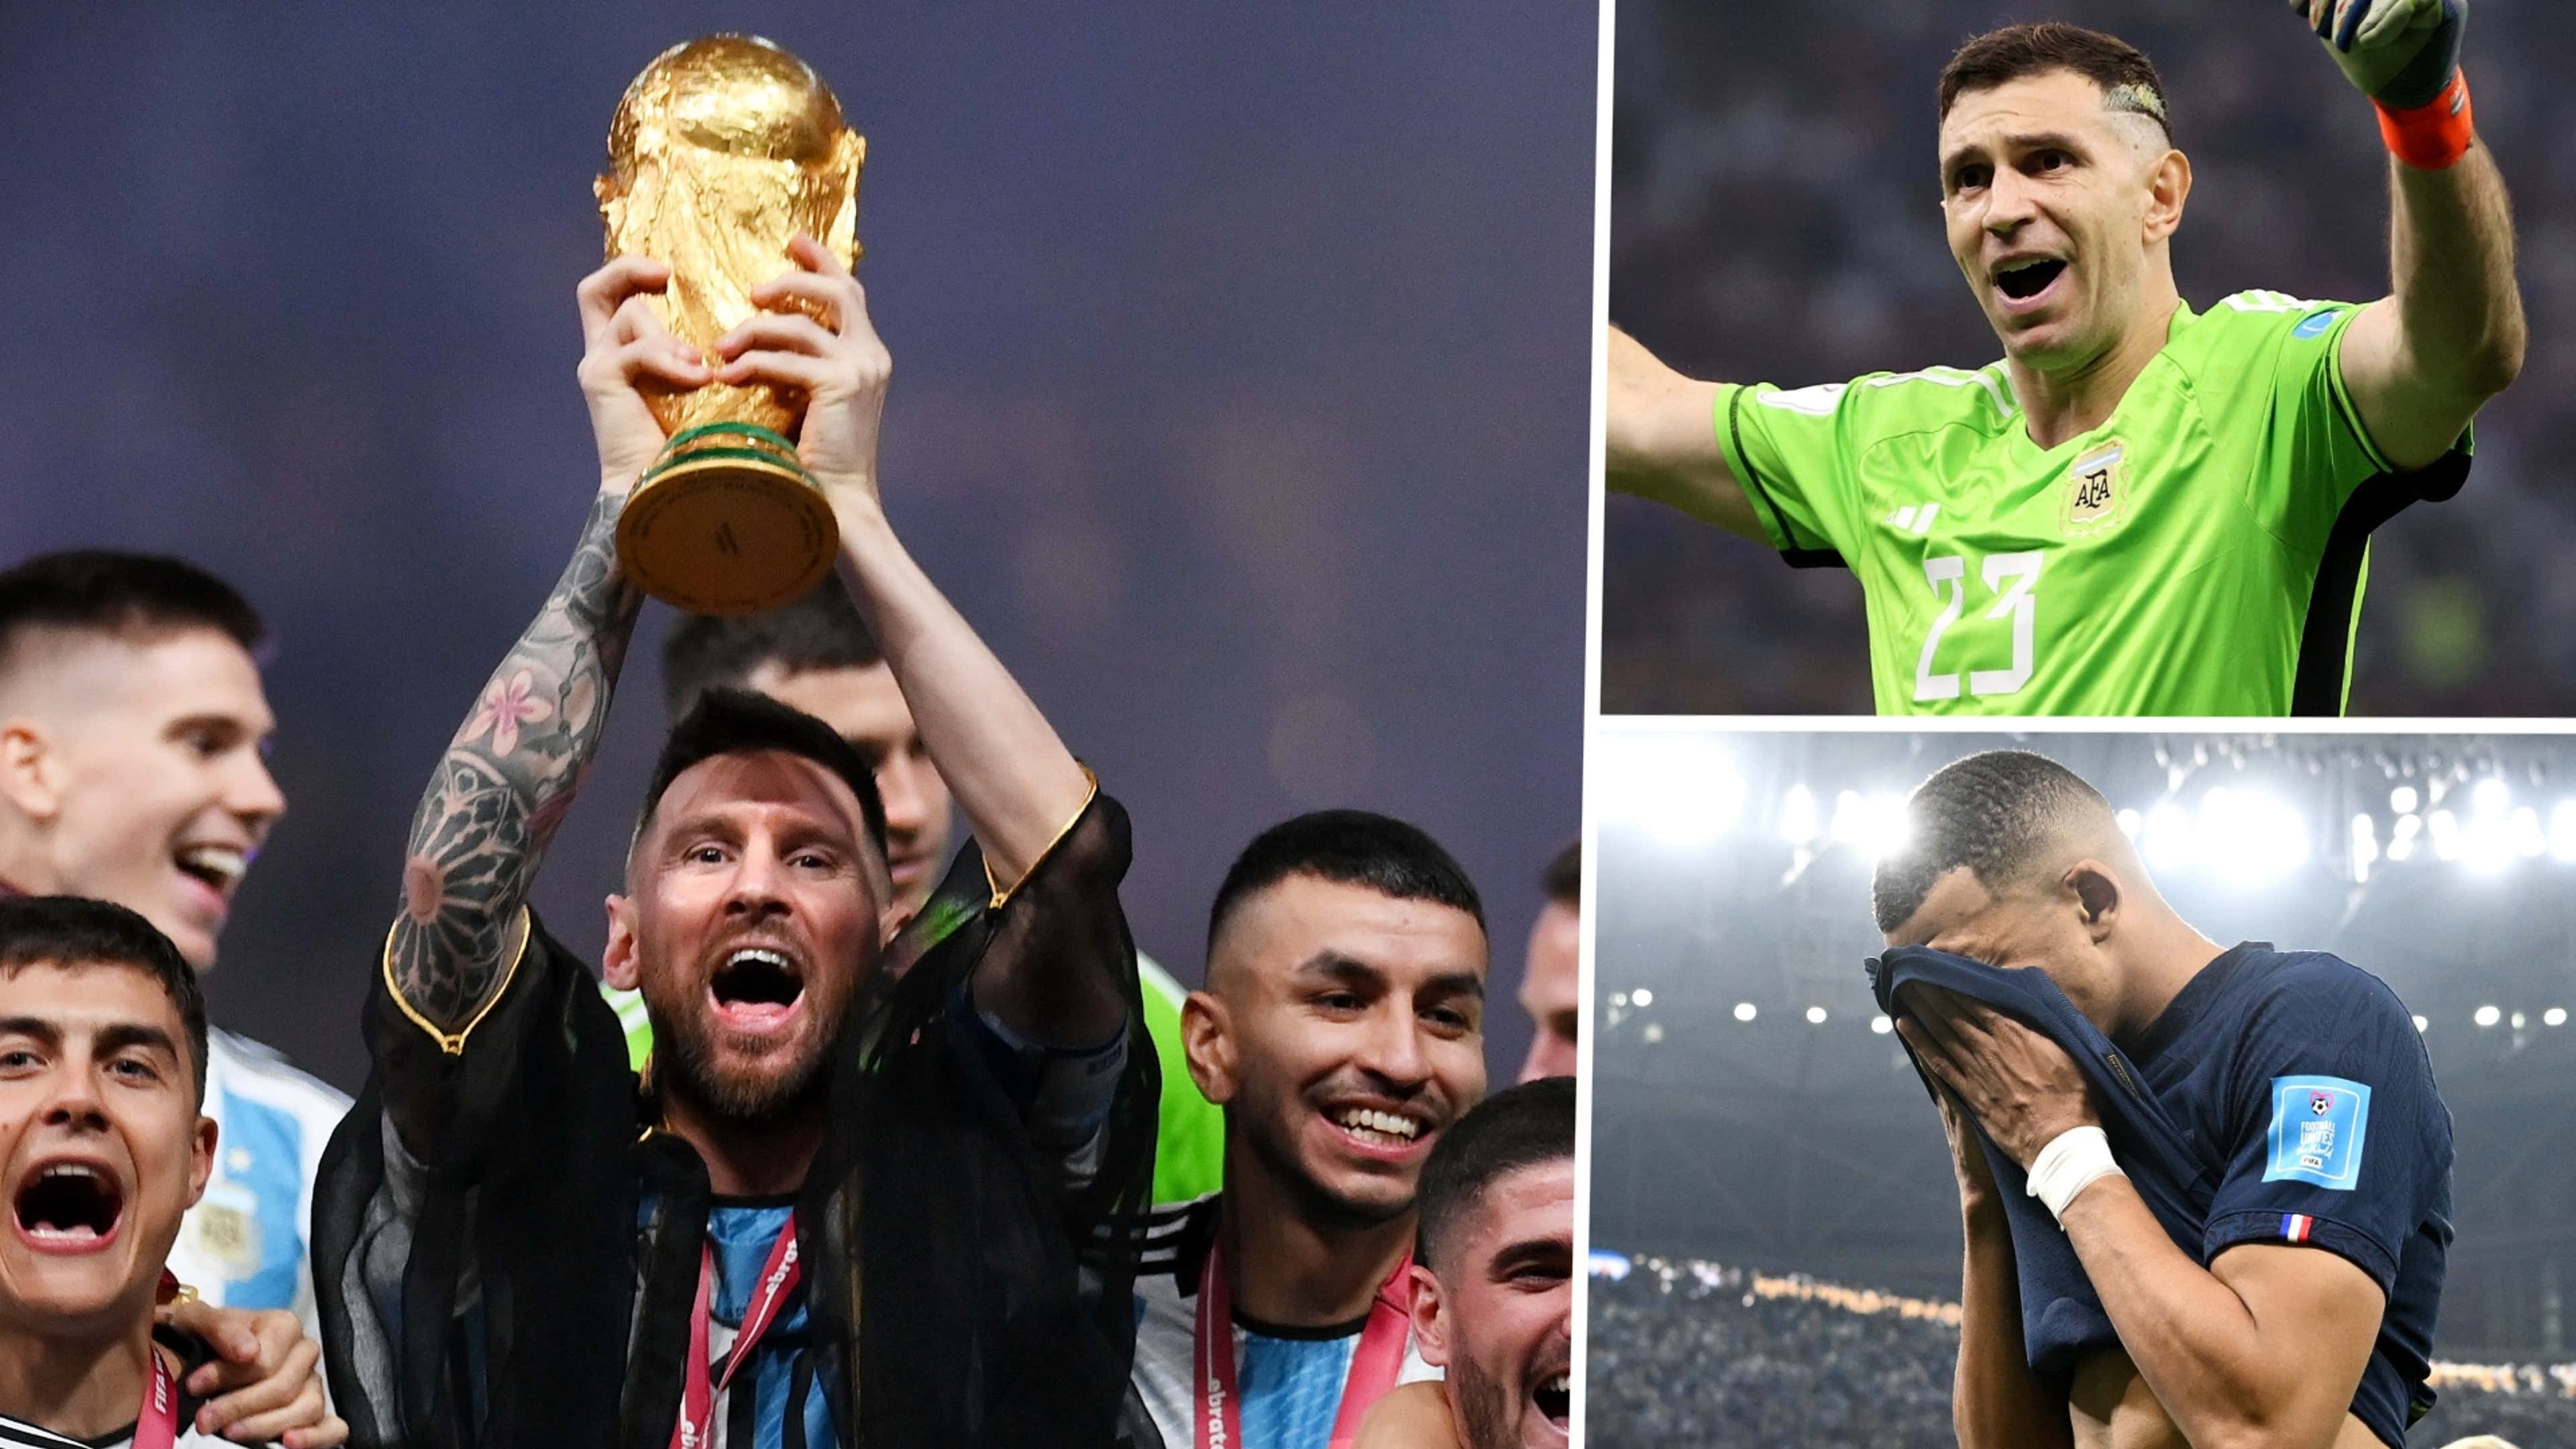 With or without a World Cup win: Messi has shown he's the GOAT at